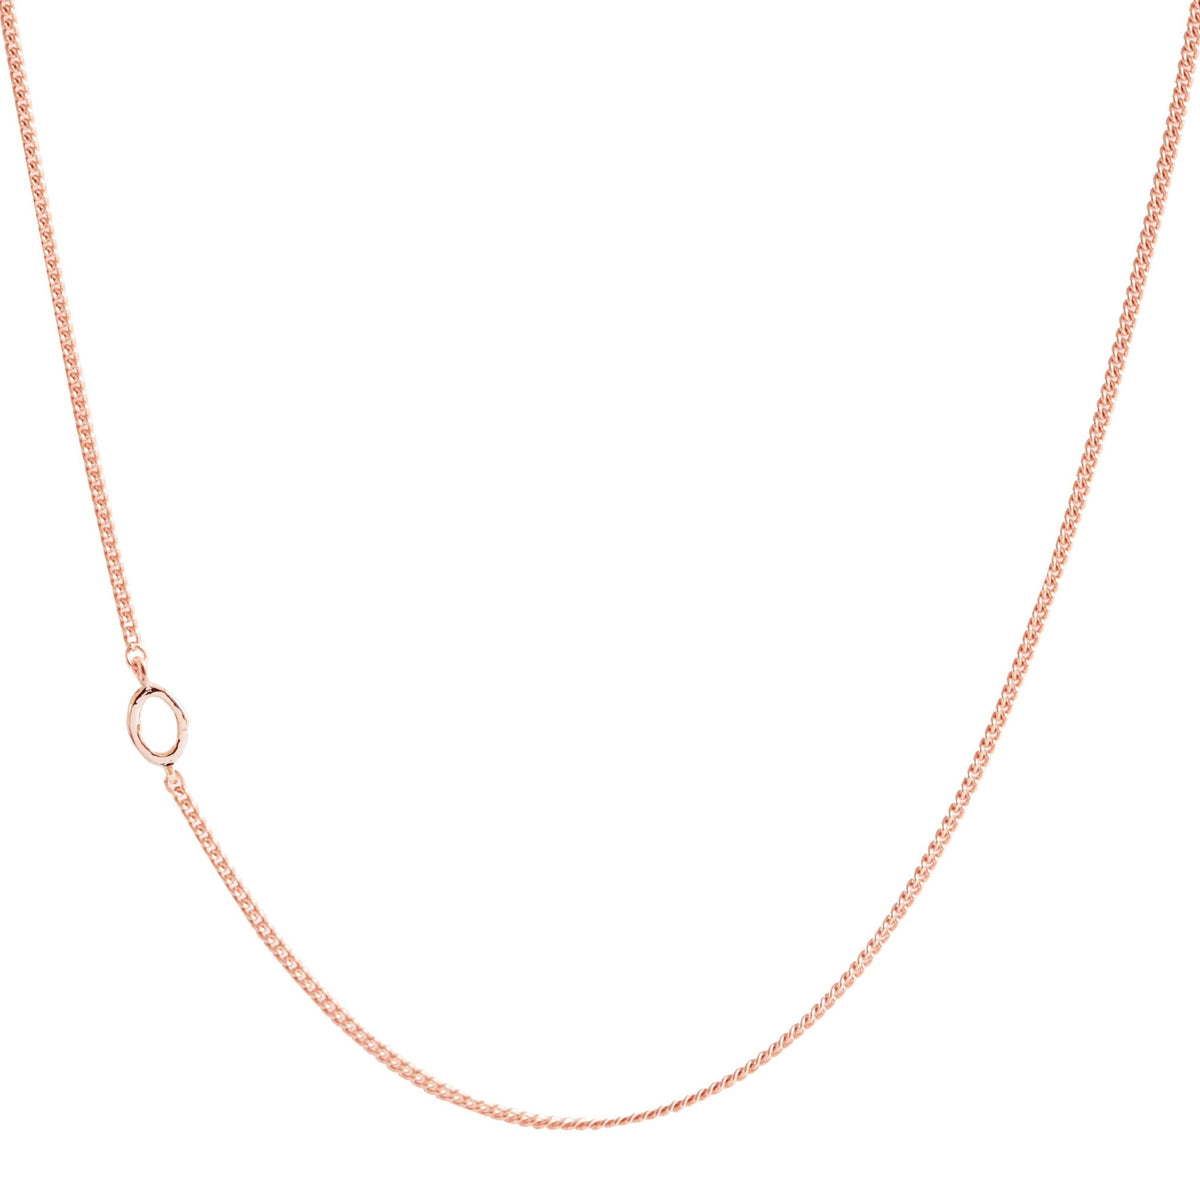 NOTABLE OFFSET INITIAL NECKLACE - O - GOLD, ROSE GOLD, OR SILVER - SO PRETTY CARA COTTER